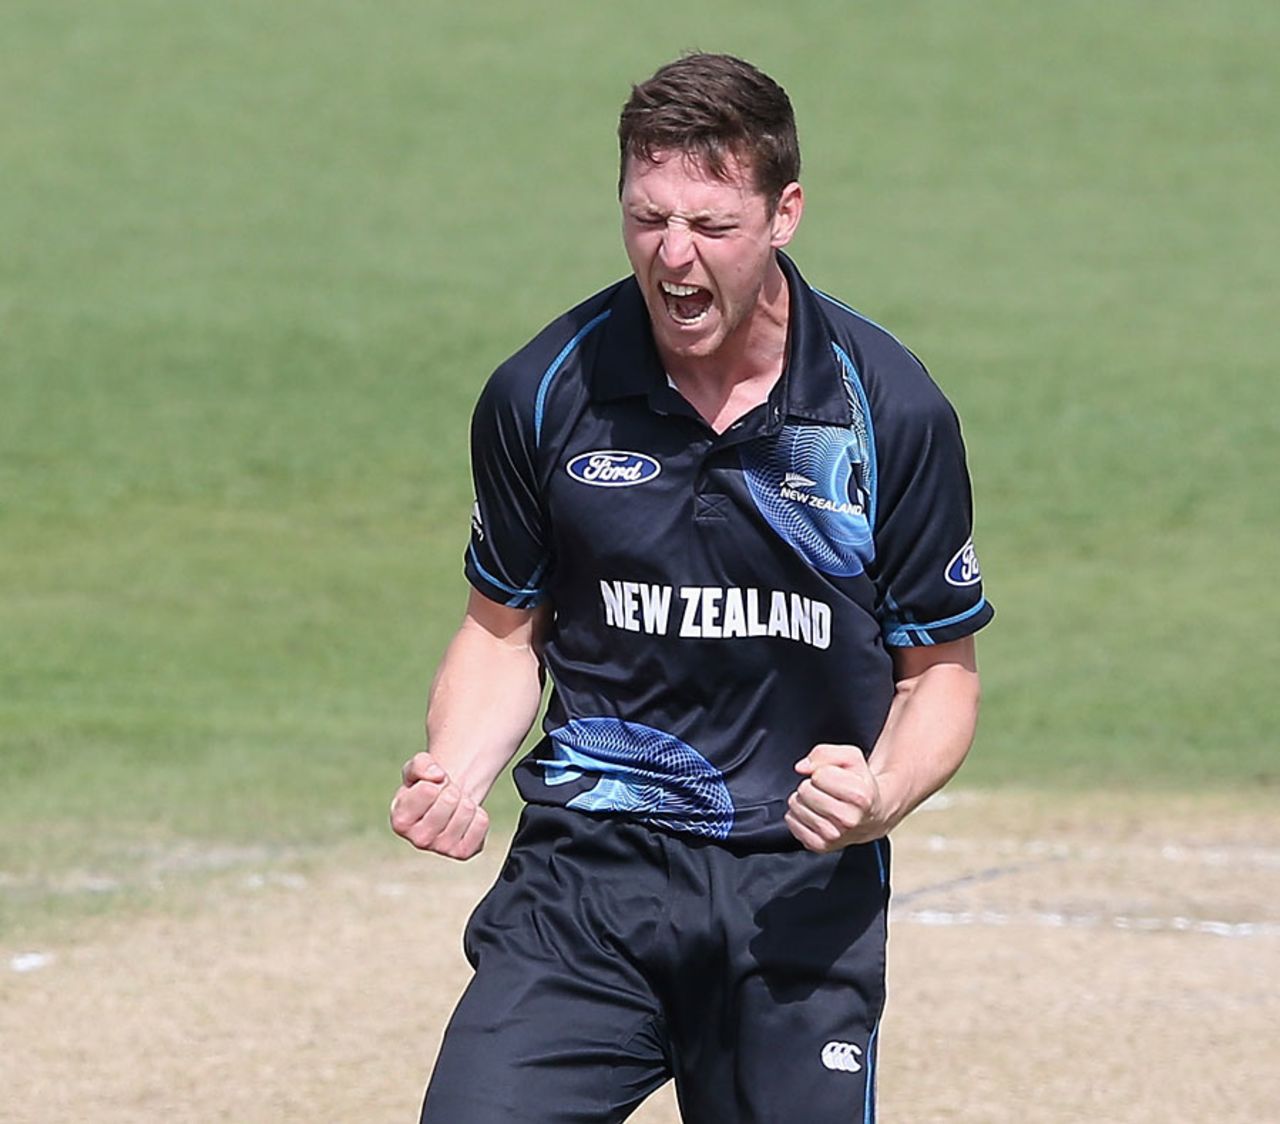 Matt Henry made early breakthroughs for New Zealand A, England Lions v New Zealand A, Tri-series, New Road, August 12, 2014